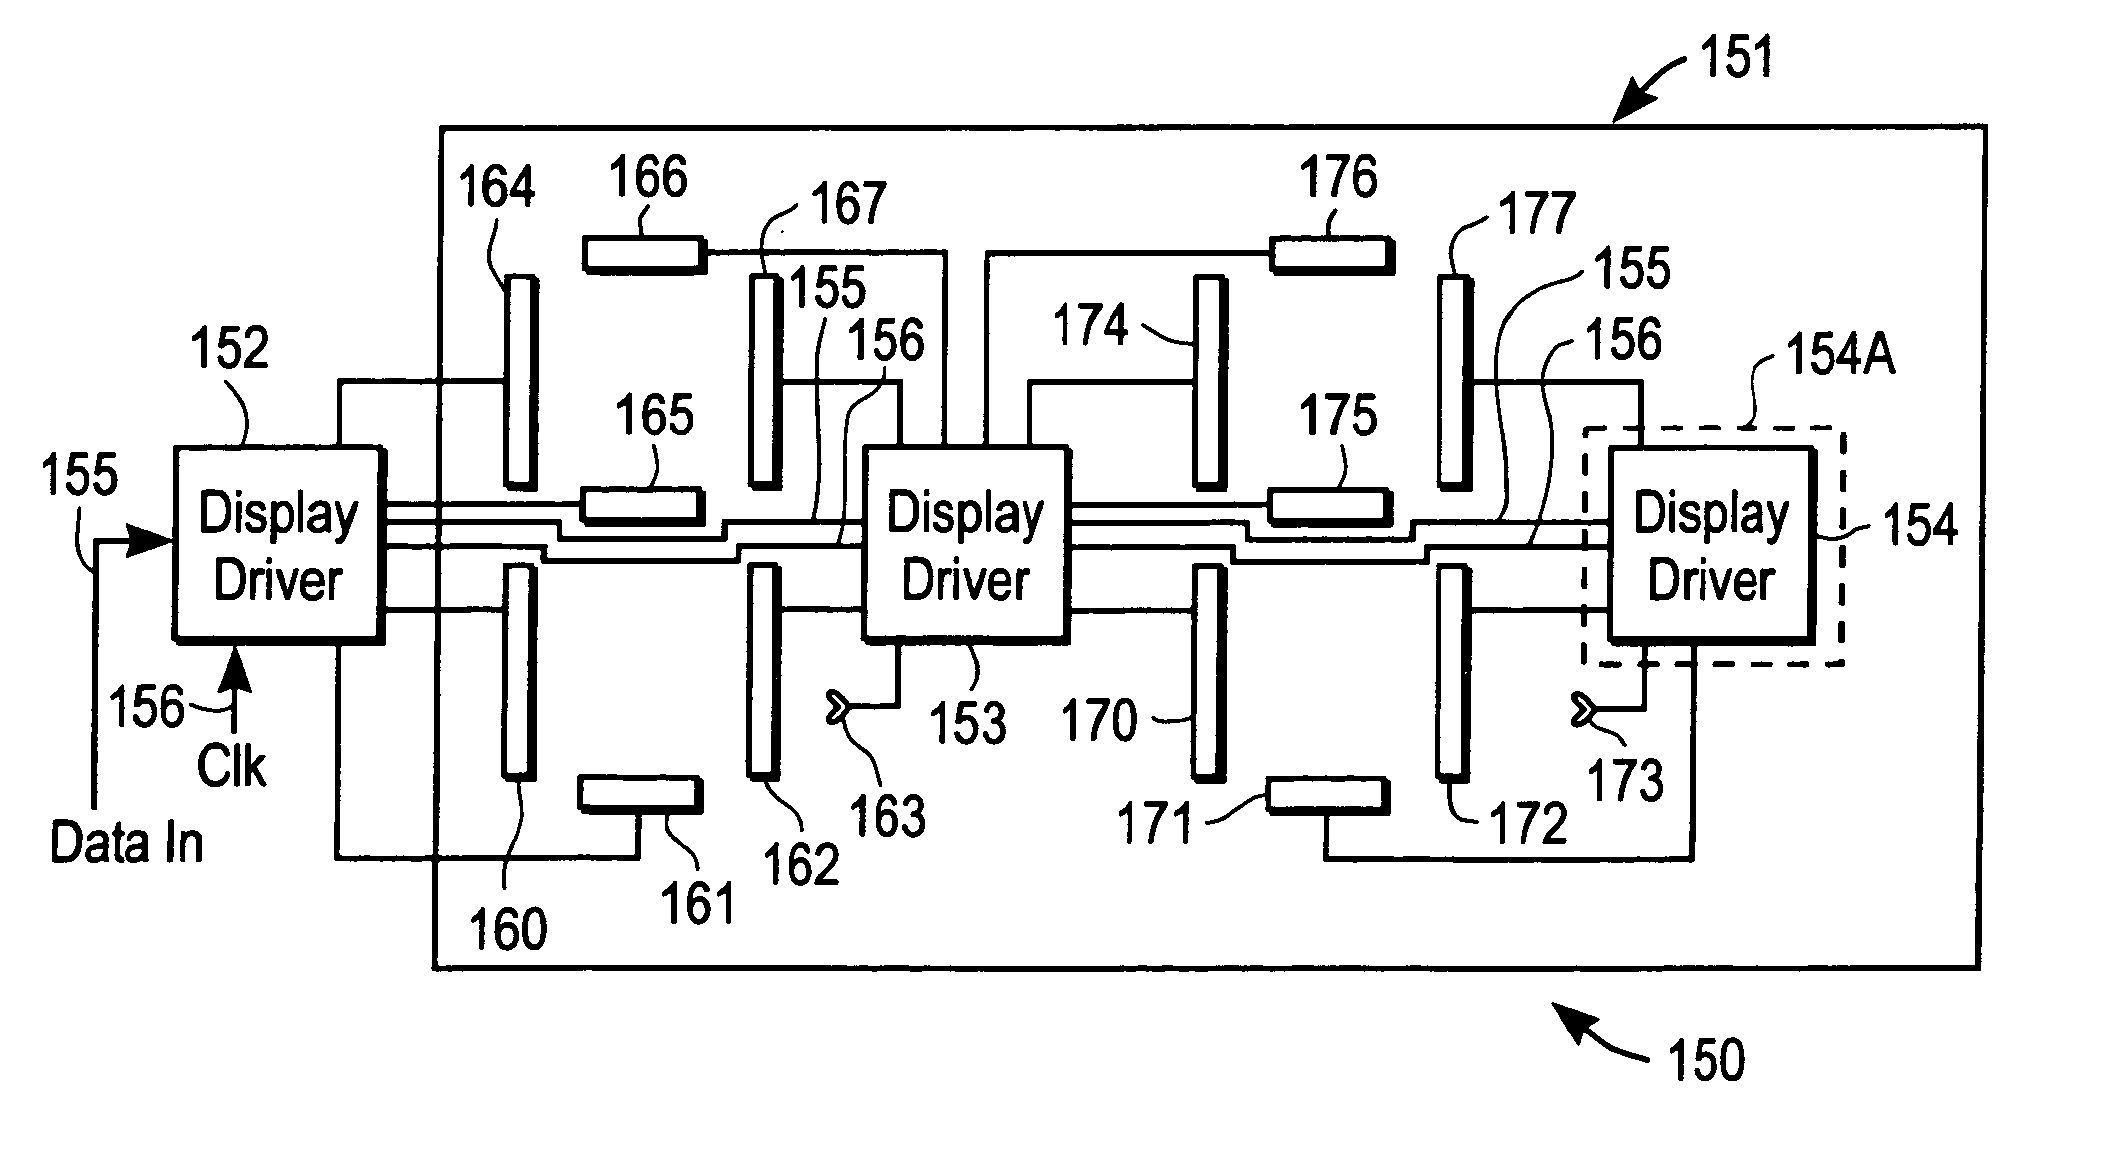 Display devices and integrated circuits